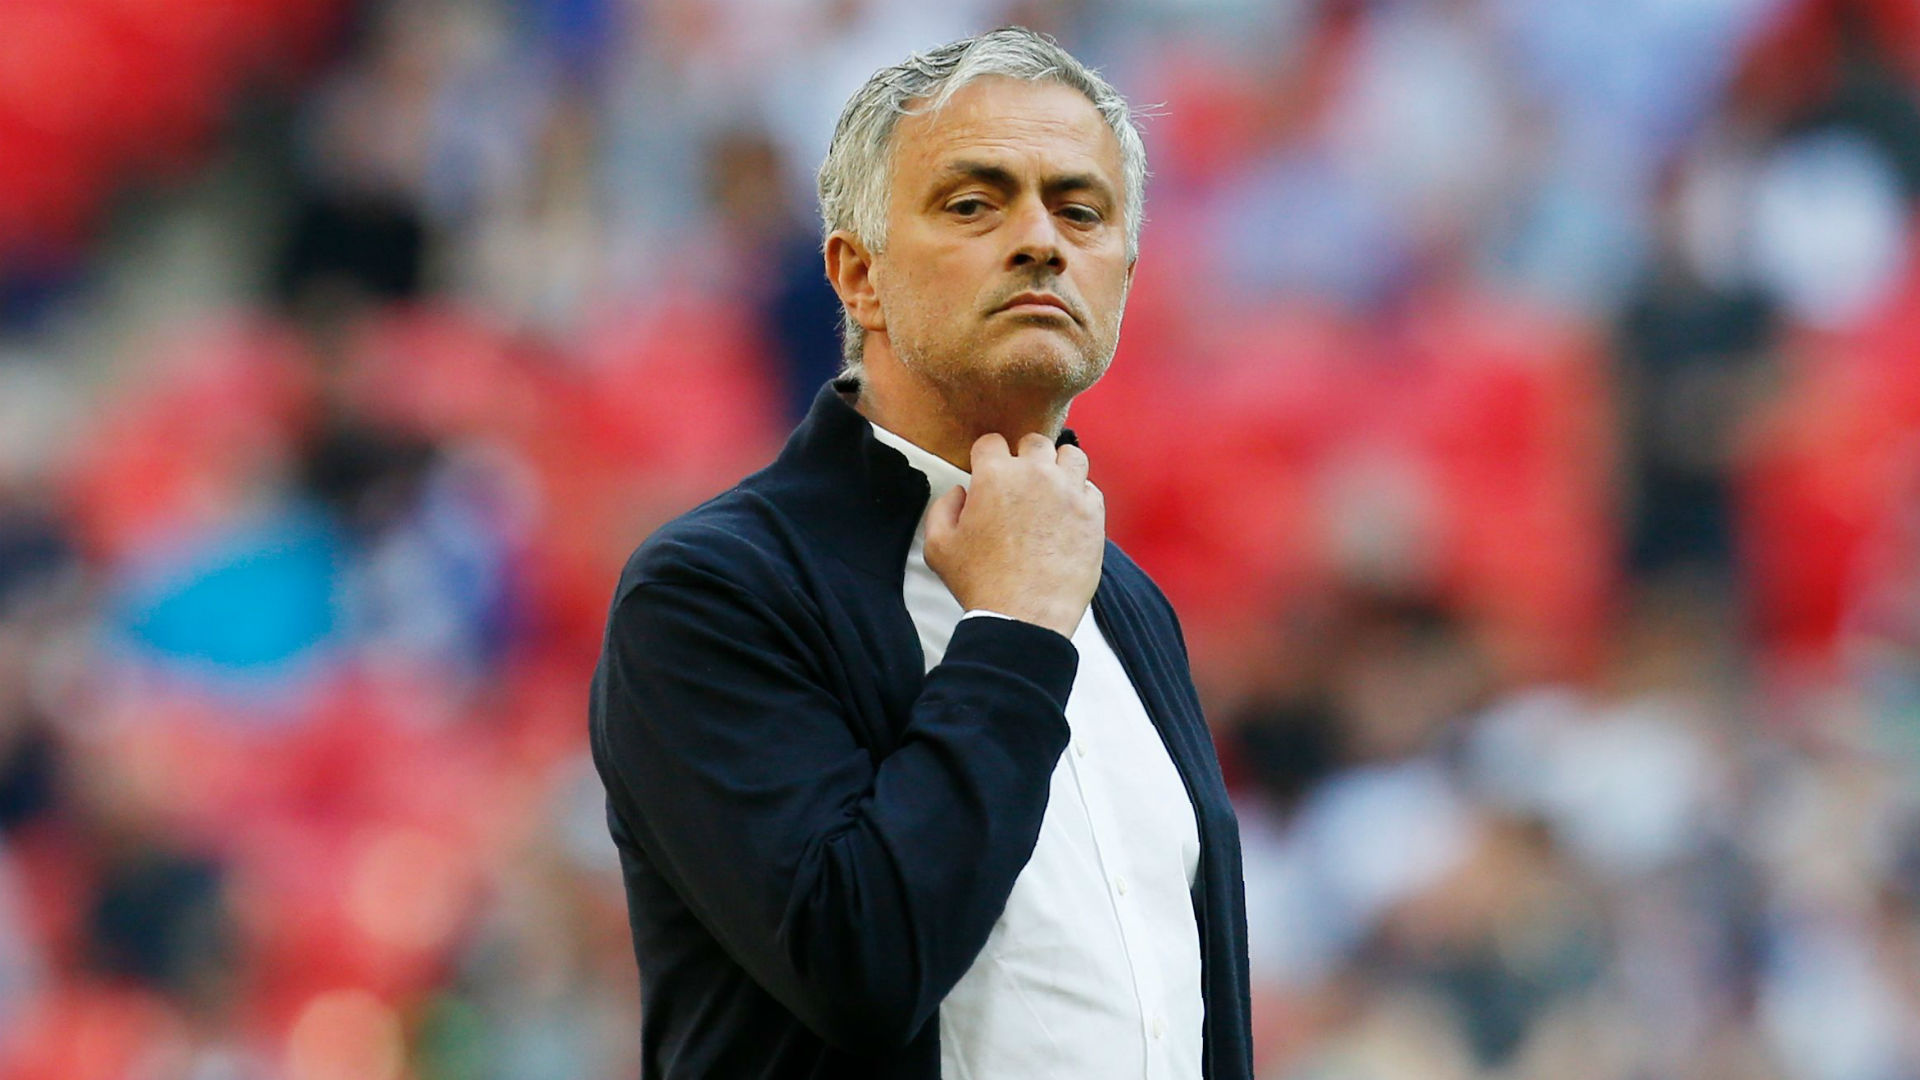 Will Mourinho Be First Coach Fired Come December?